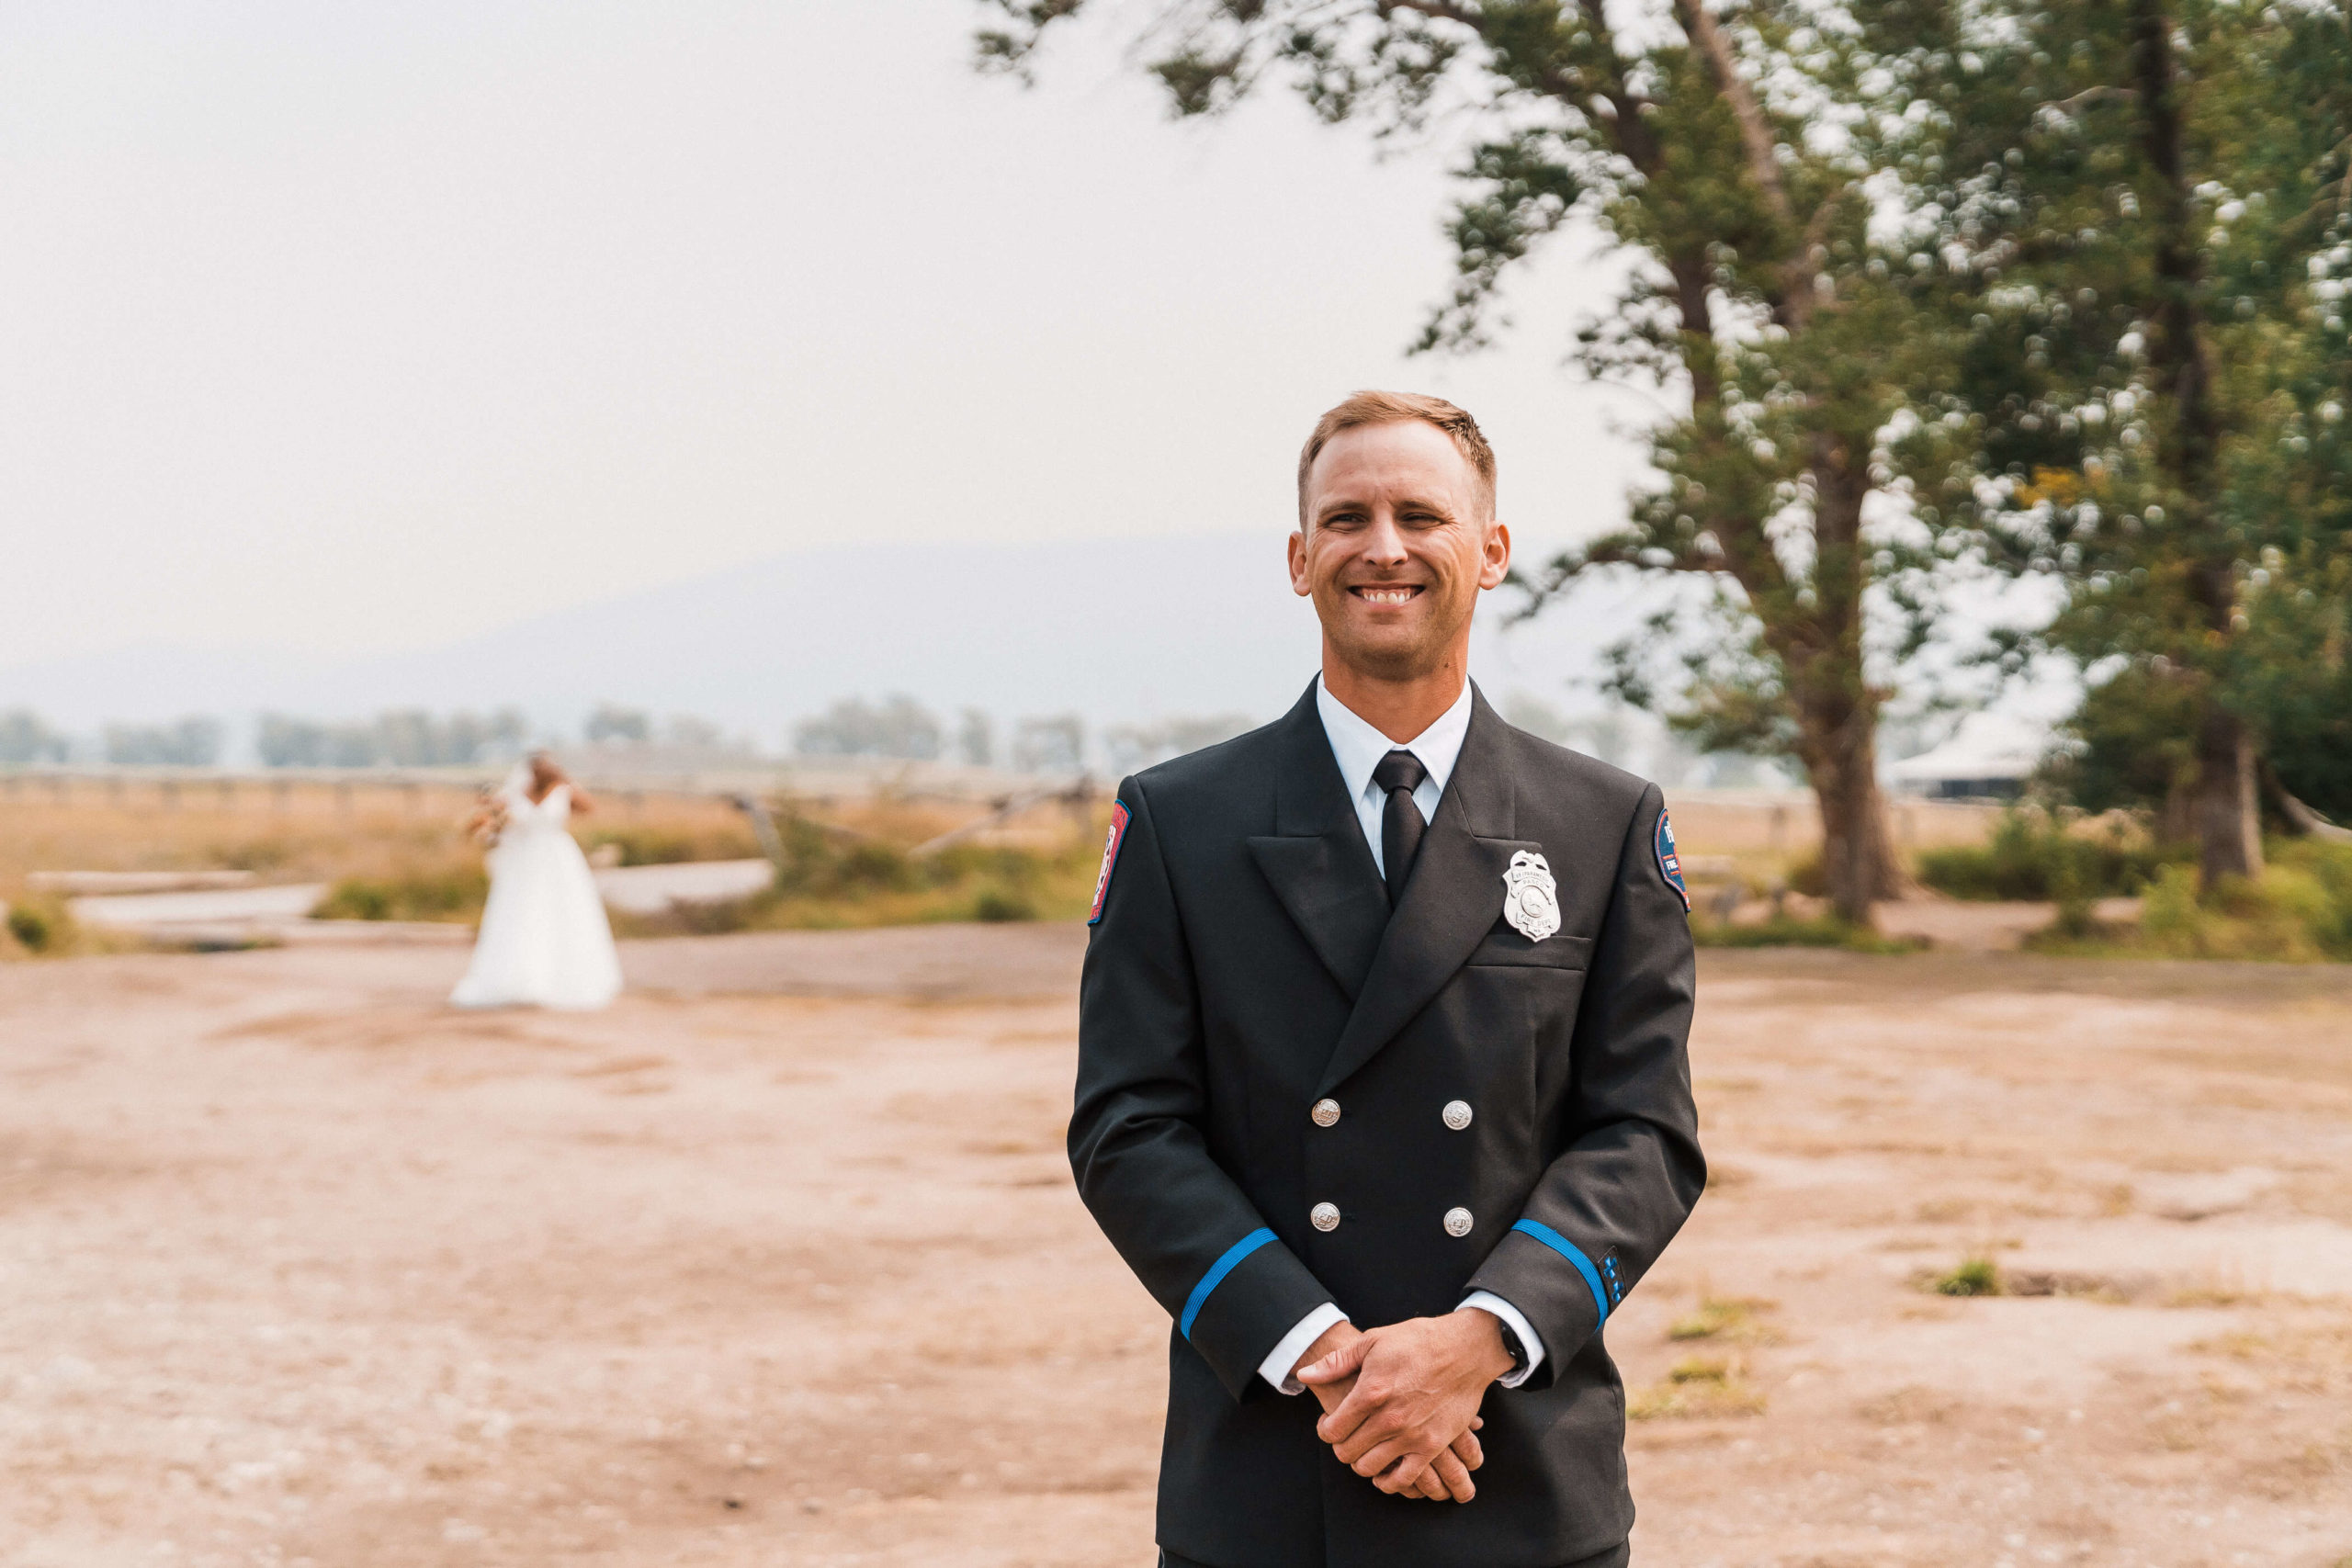 Groom in uniform smiling while waiting for bride for their first look